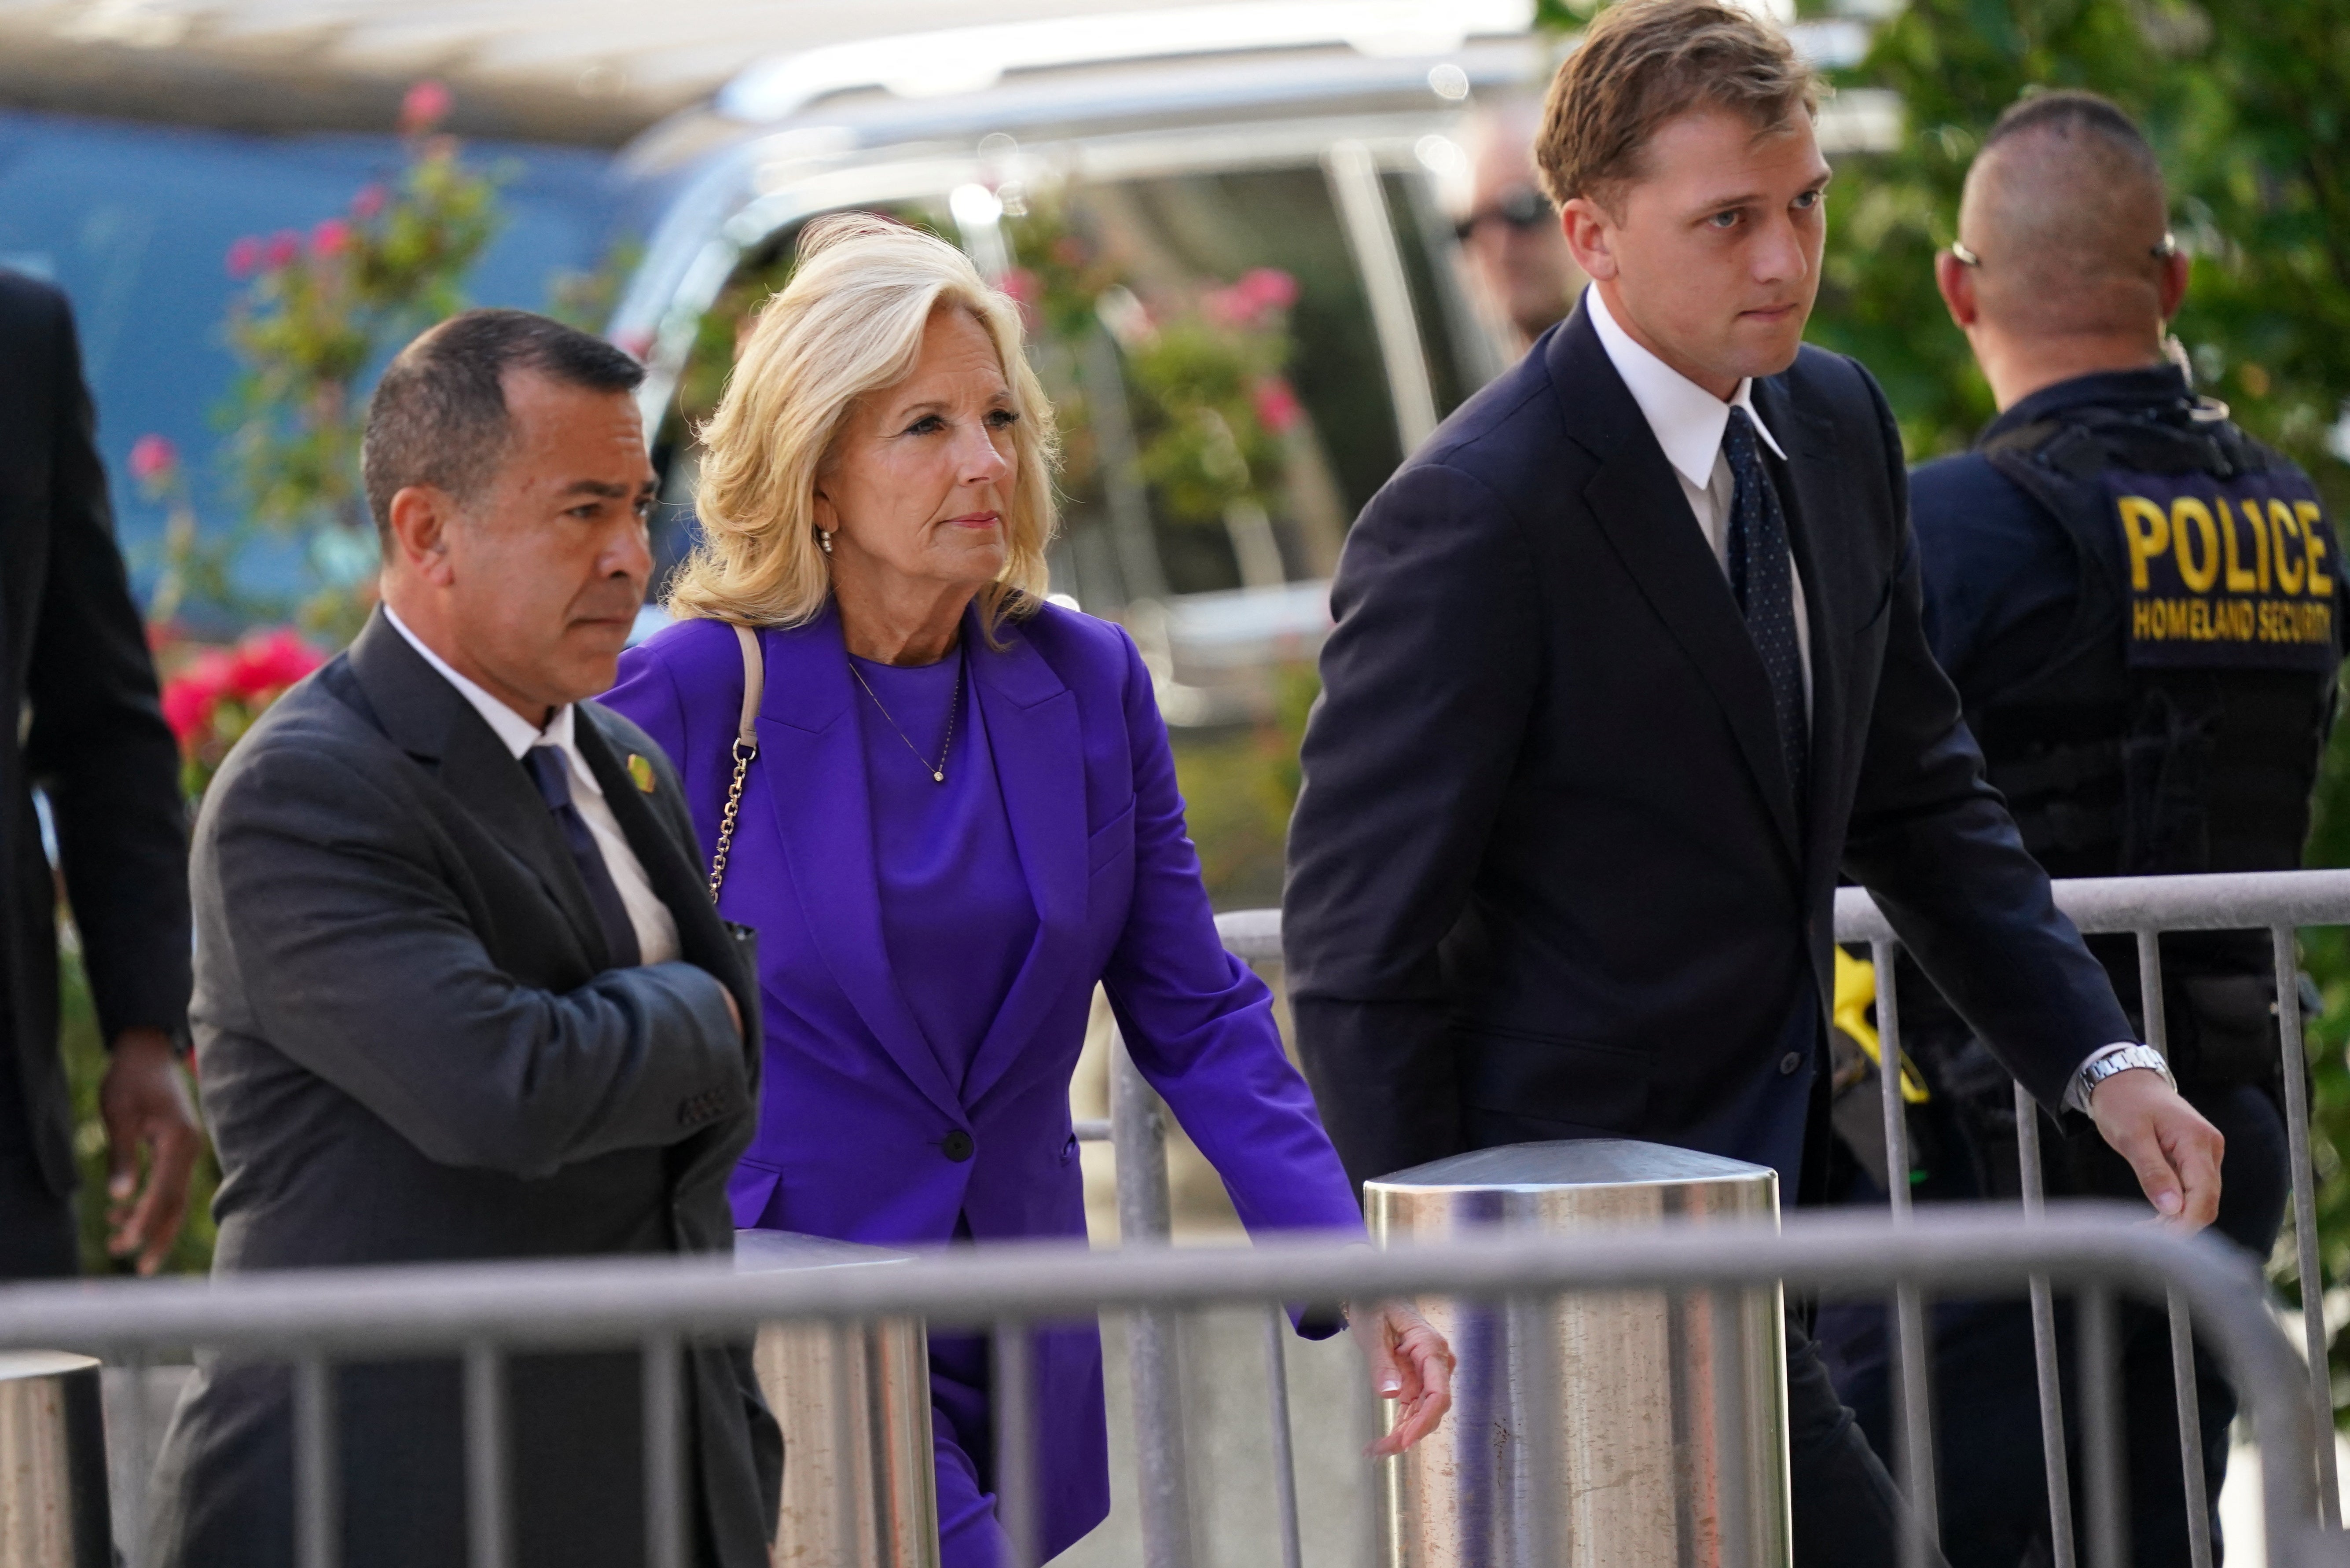 Jill Biden arrives at the federal court on the opening day of the trial of Hunter Biden